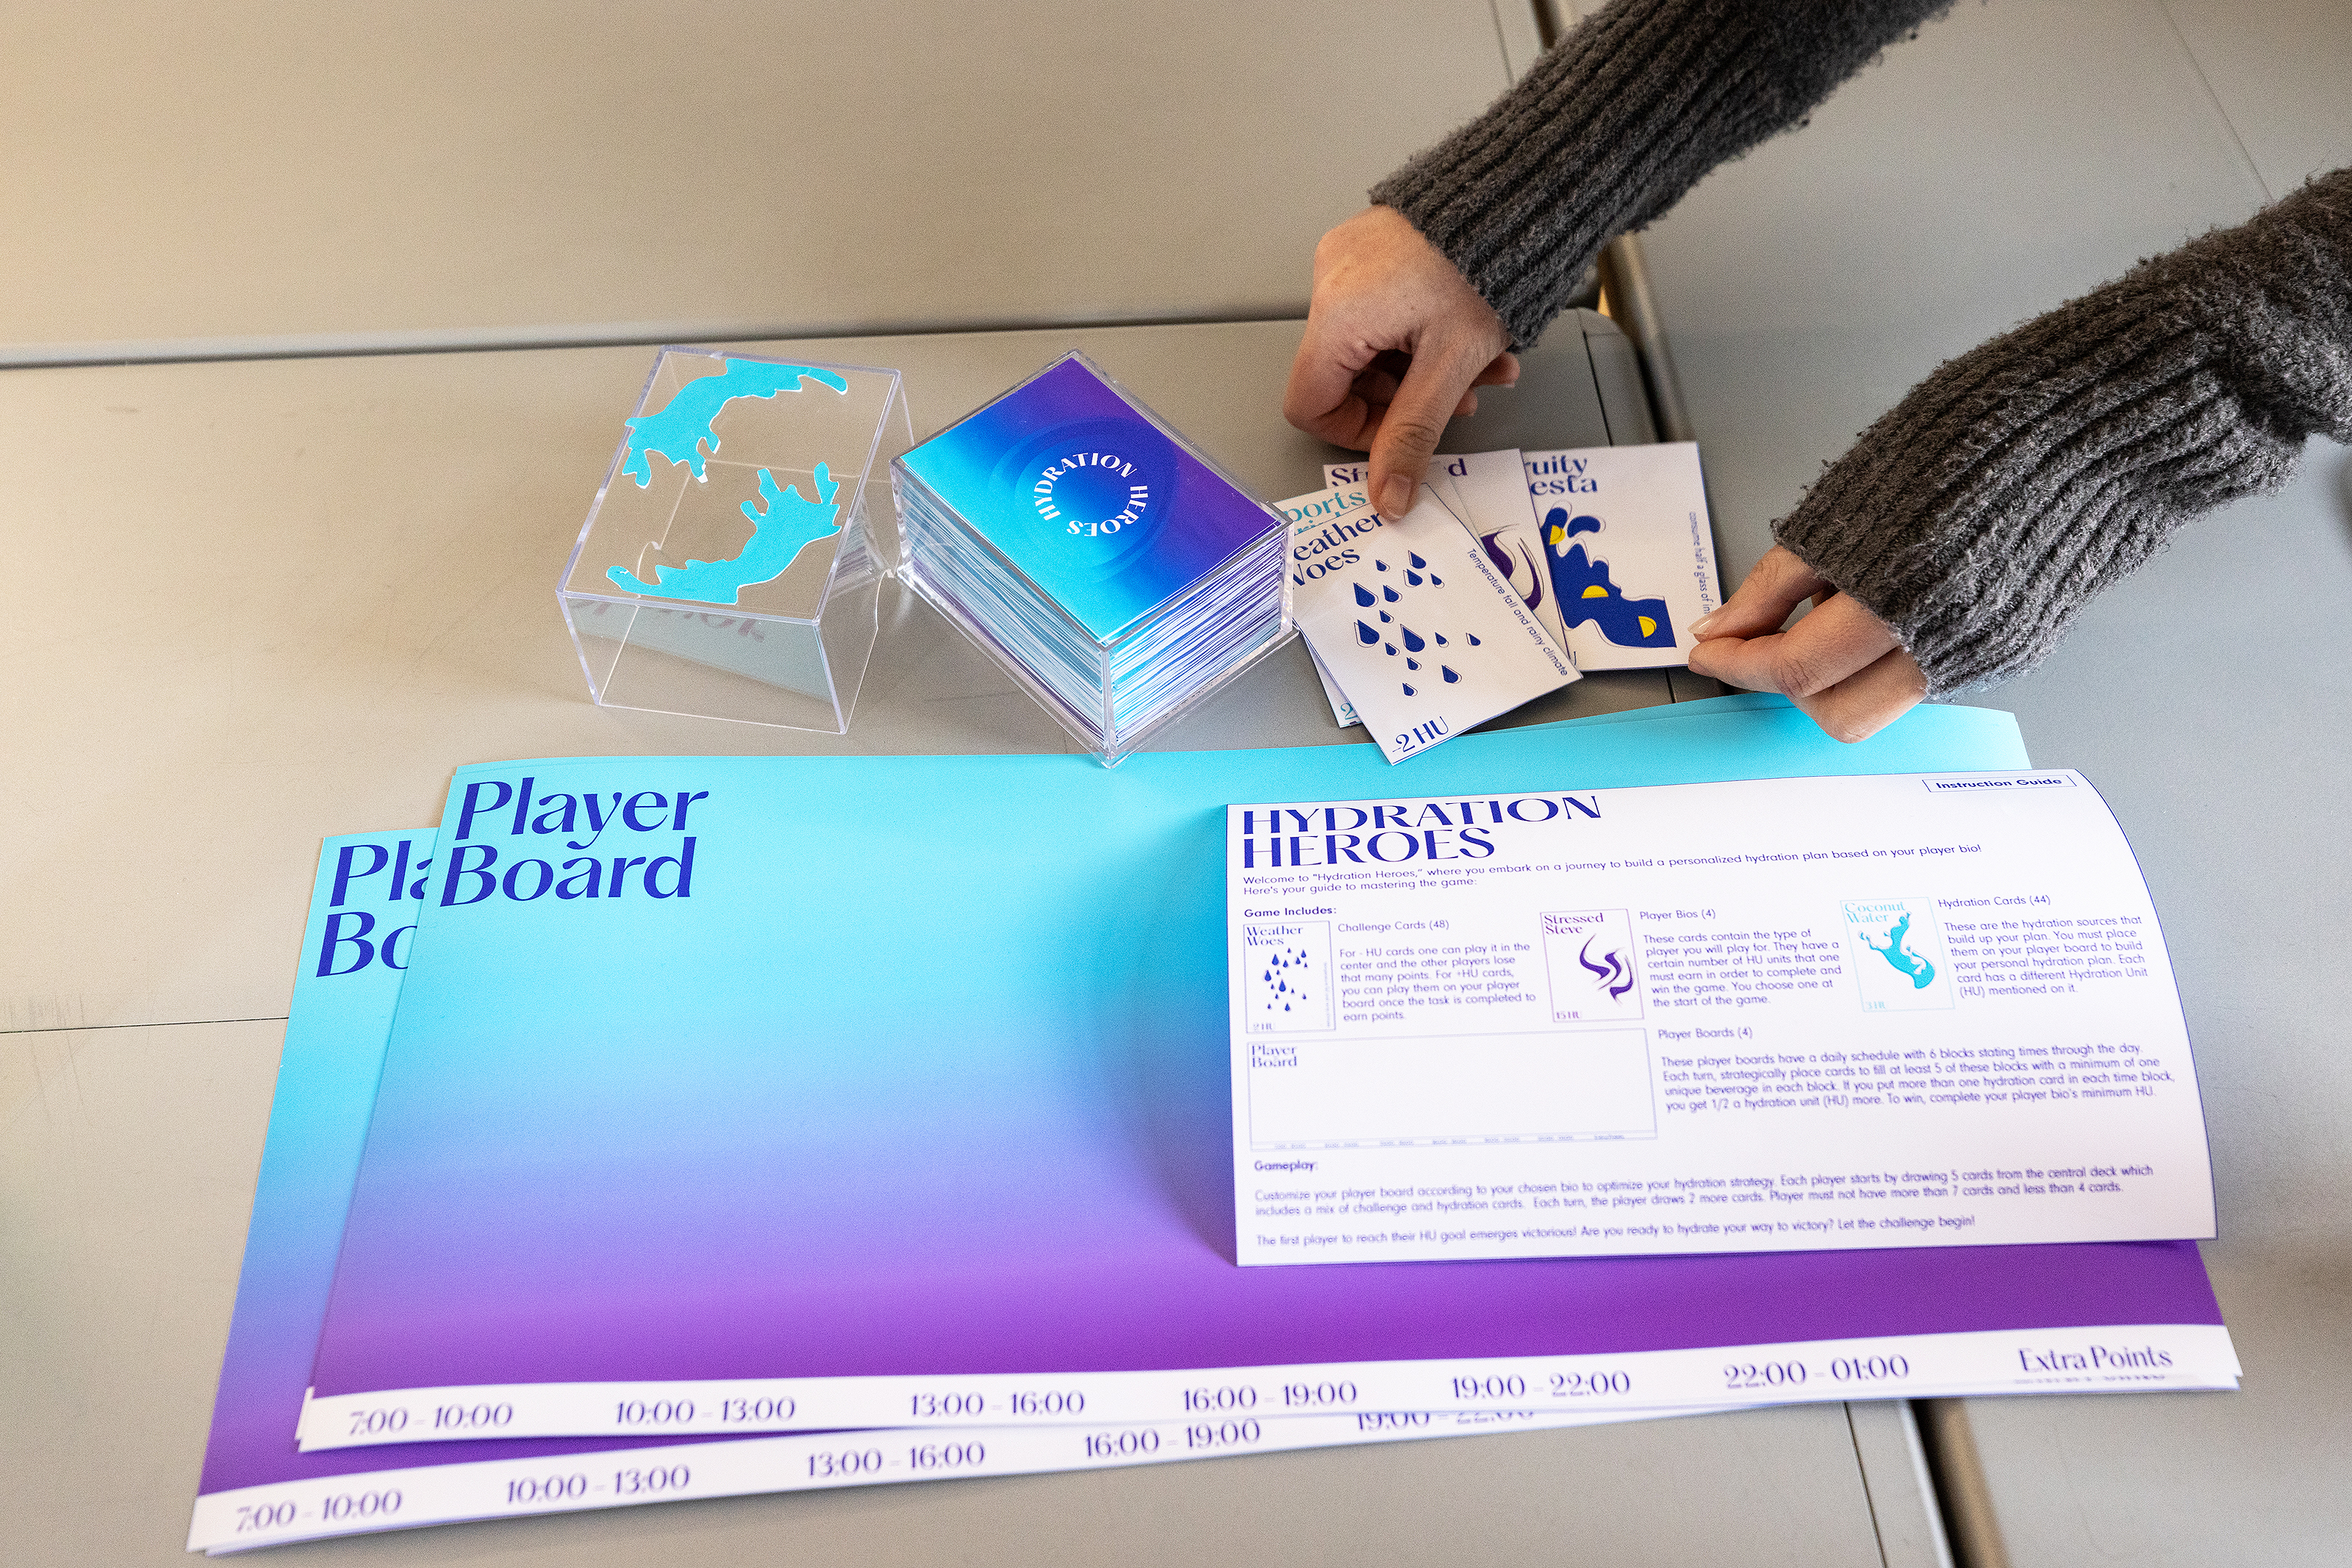 Hydration Heroes is a board game about staying hydrated